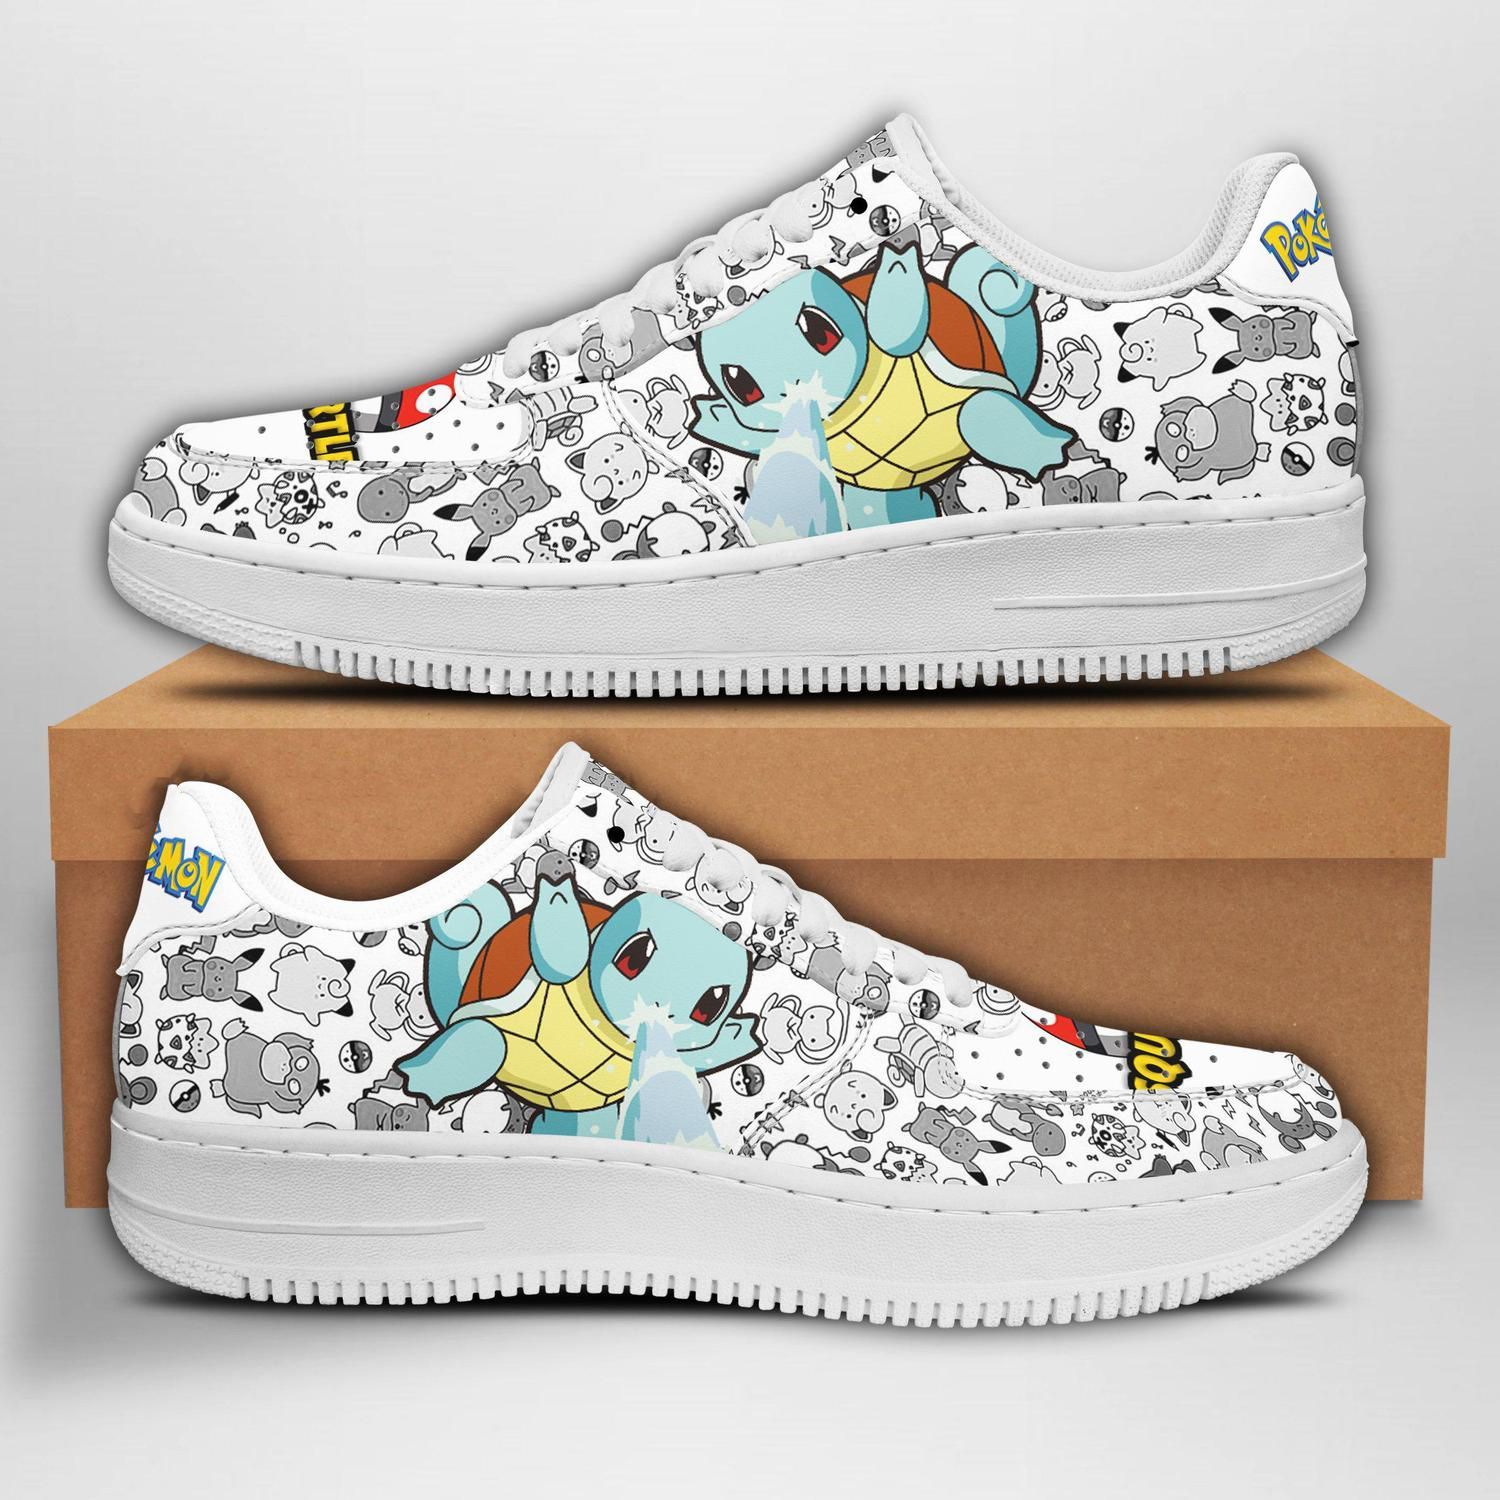 Squirtle Pokemon Air Force 1 Low Top Shoes Sneakers